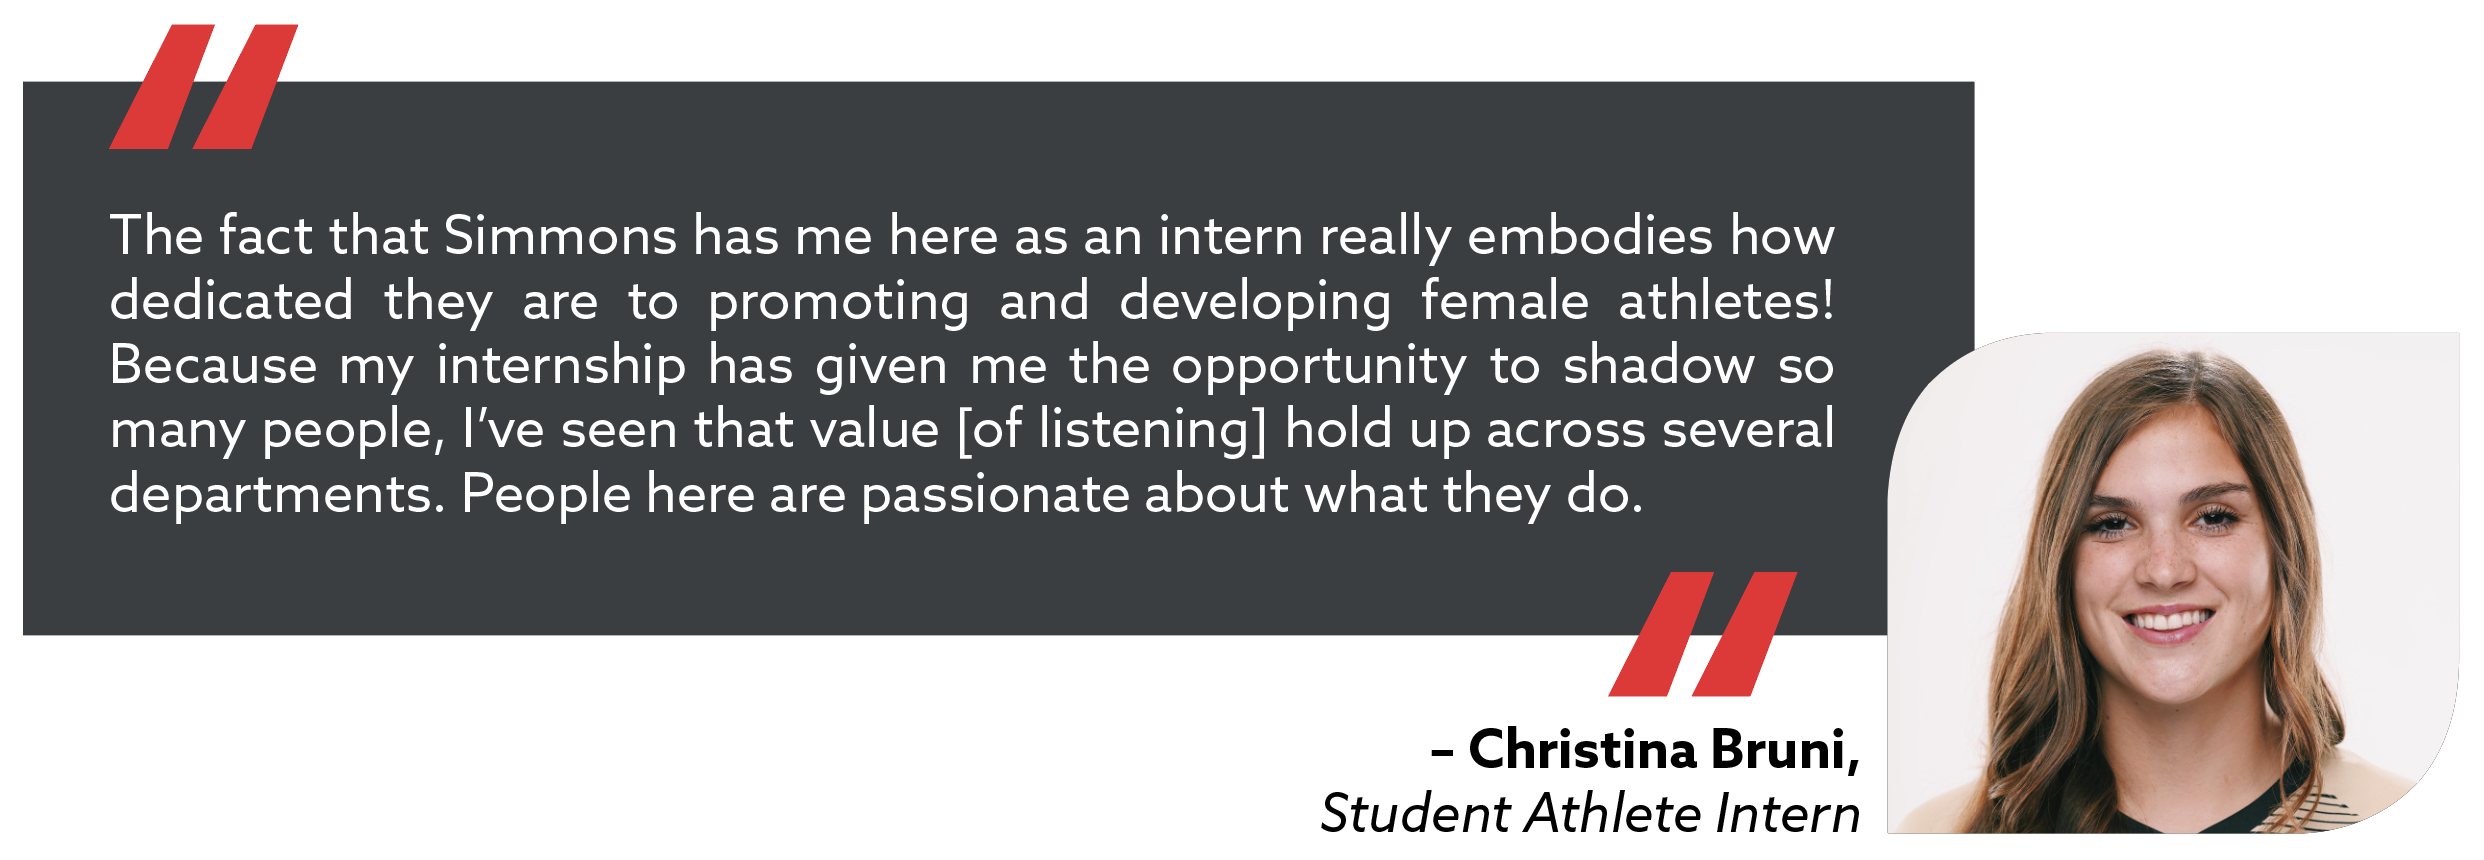 quote from Christina Bruni, Student Athlete intern. The fact that Simmons has me here as an intern really embodies how dedicated they are to promoting and developing female athletes. Because my internship has given me the opportunity to shadow so many people, I've seen that value hold up across several departments. People are passionate about what they do. 